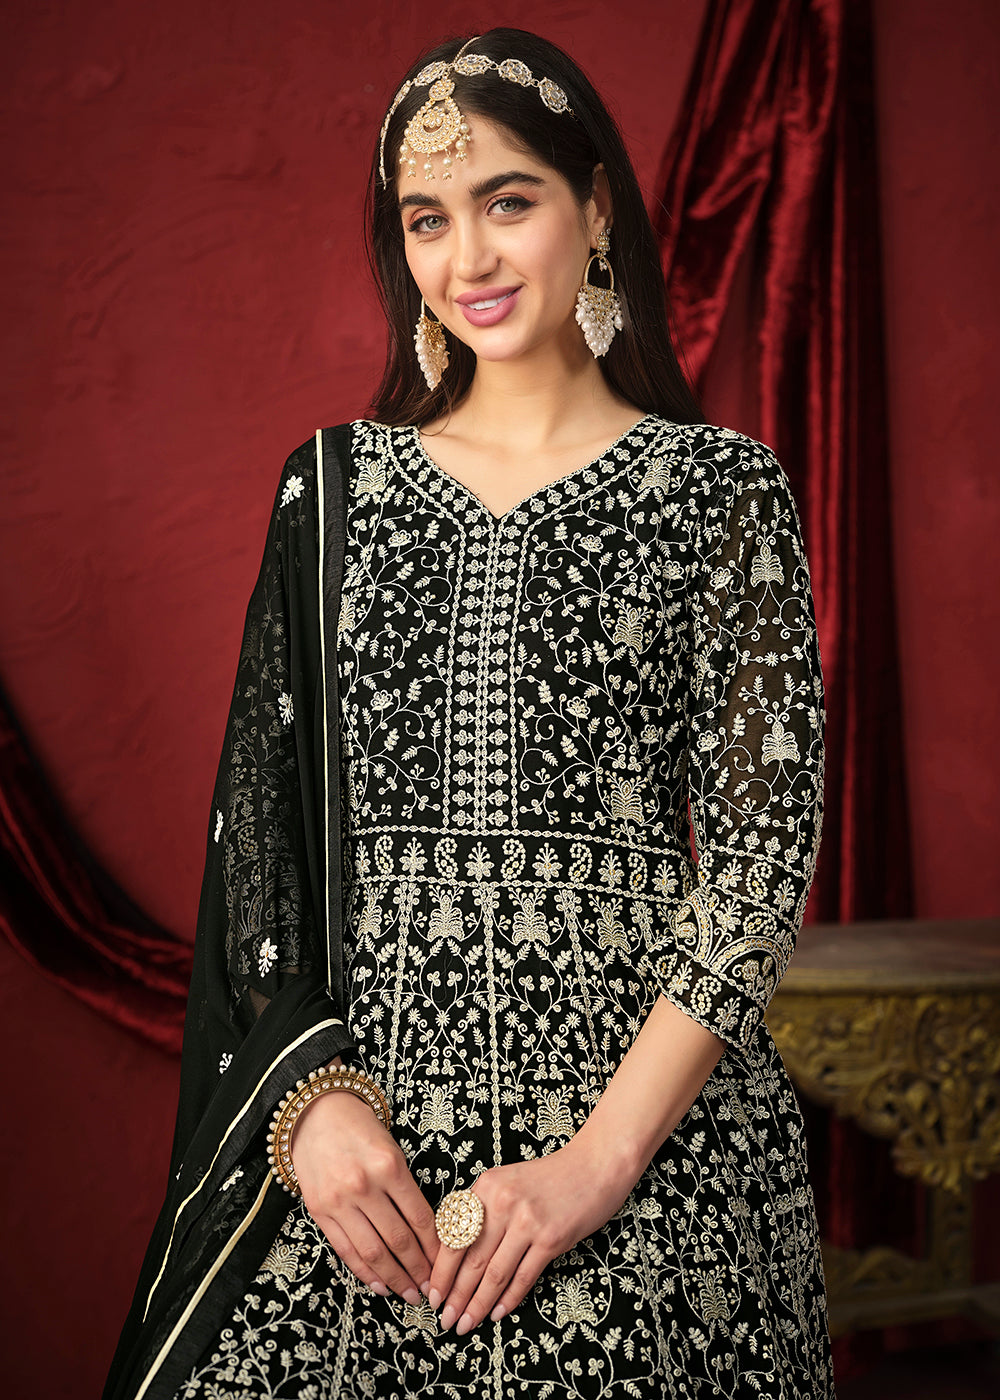 Buy Now Stunning Black Front & Back Embroidered Trendy Anarkali Suit Online in USA, UK, Australia, New Zealand, Canada & Worldwide at Empress Clothing. 